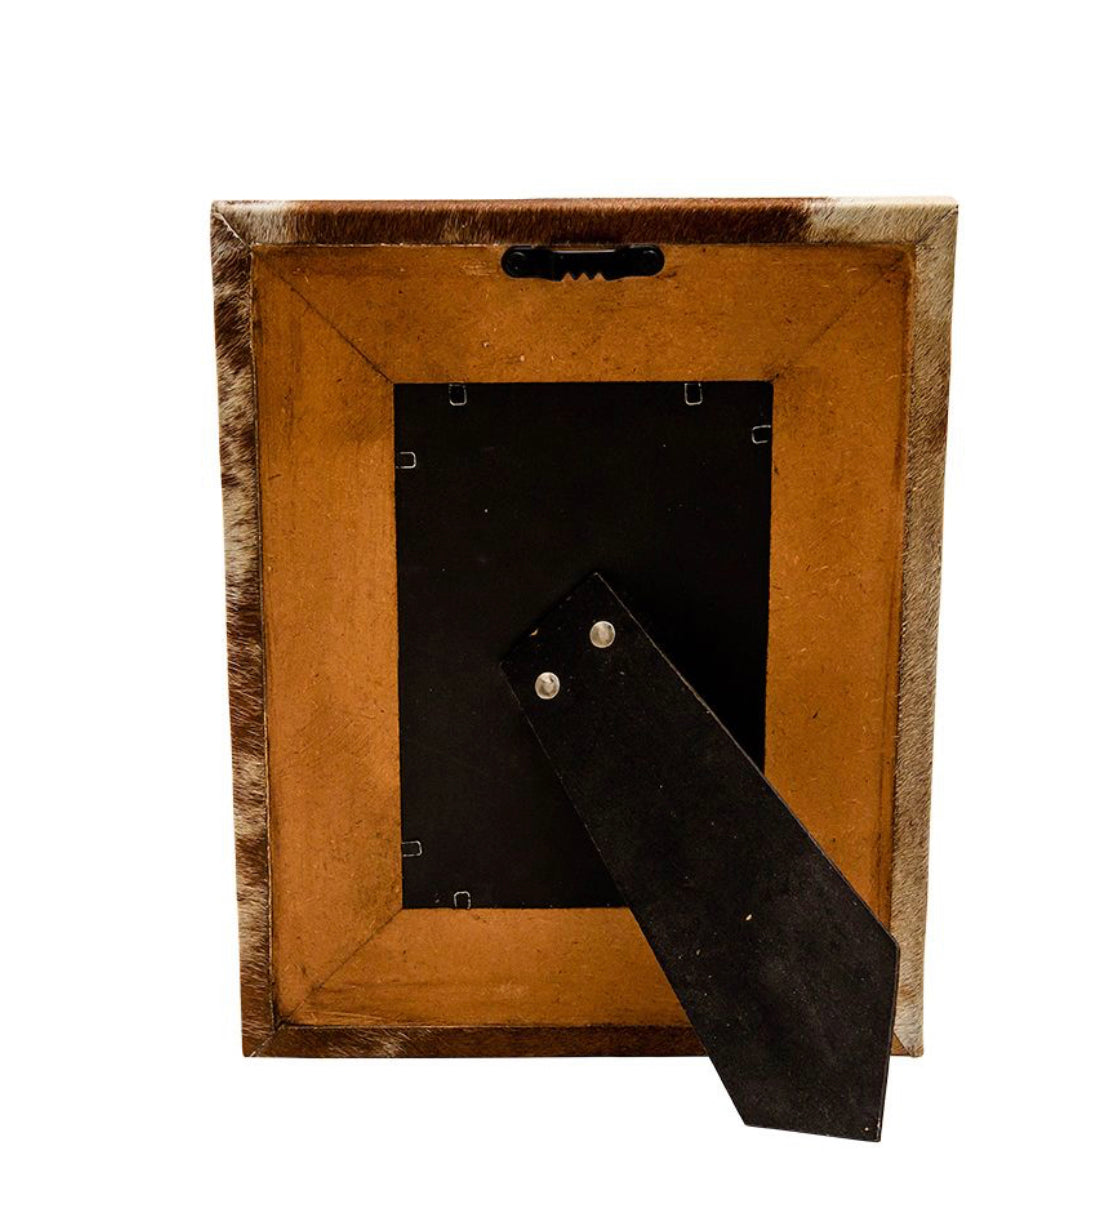 Brown picture frame